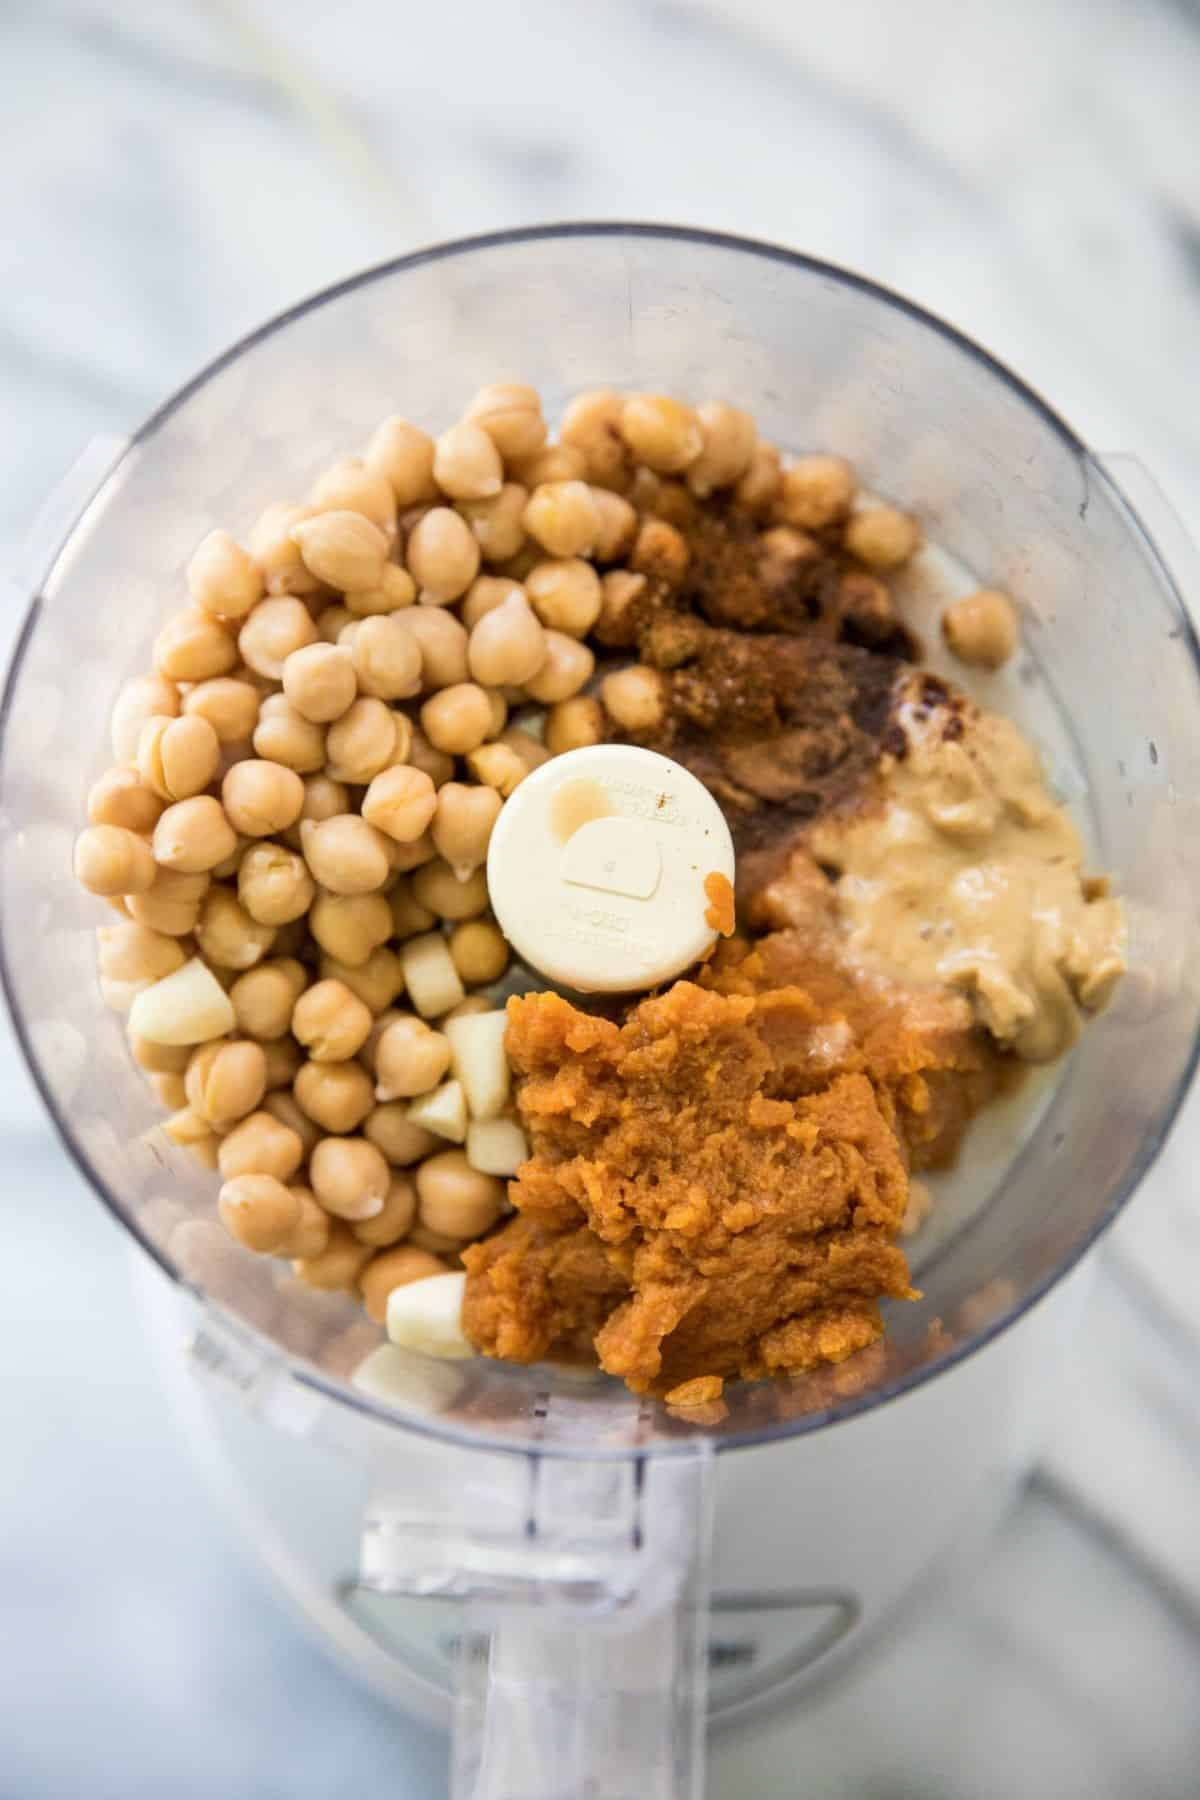 Chickpeas, pumpkin, spices and tahini in a food processor.